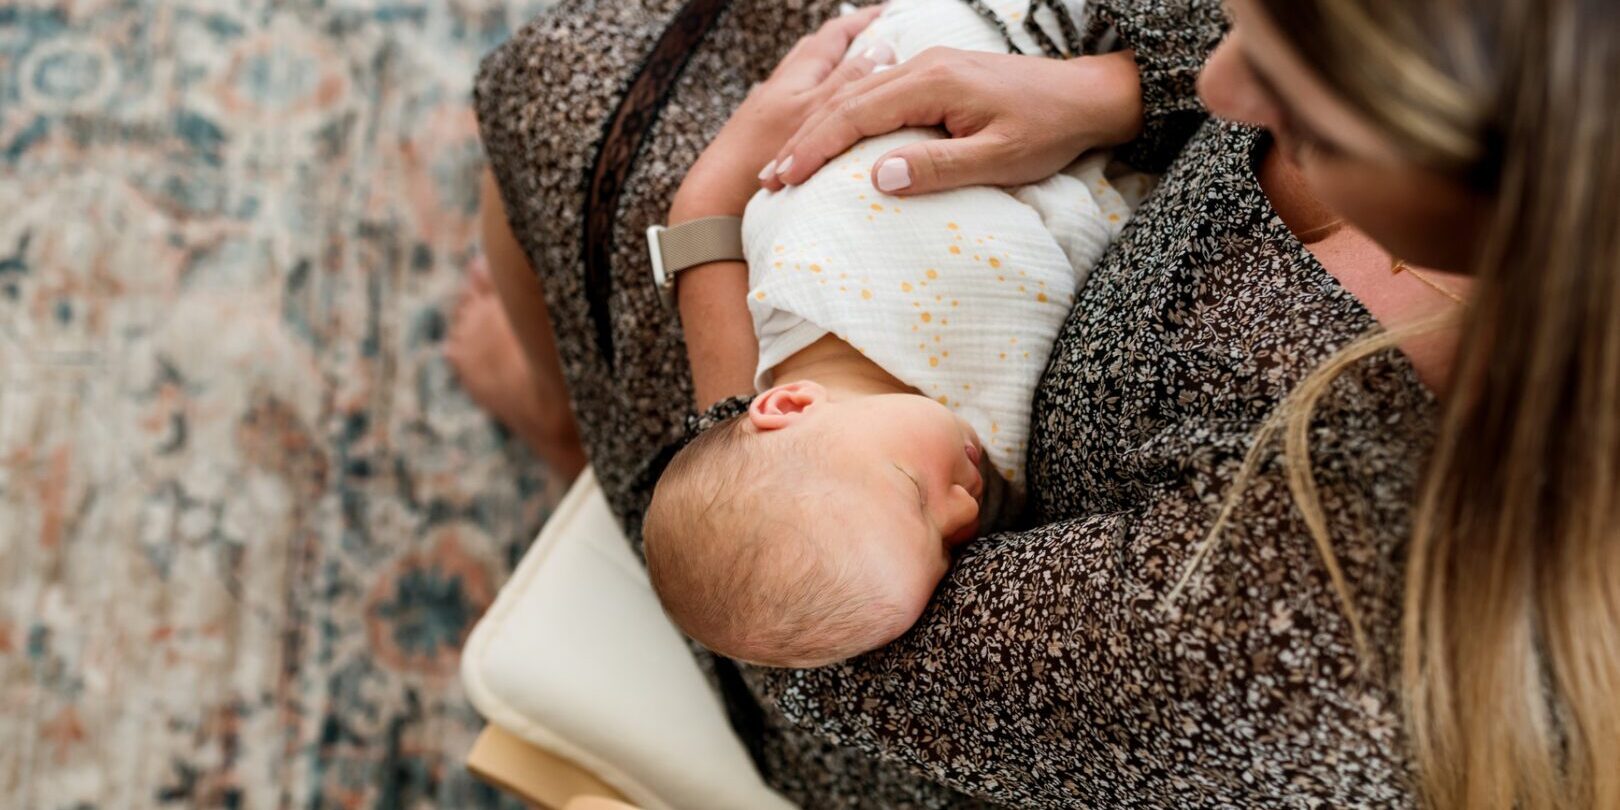 A woman holds and snuggles her sleeping baby. The baby is in a swaddle and is peaceful. The mom is wearing a dark flowered dress and the image is from above.